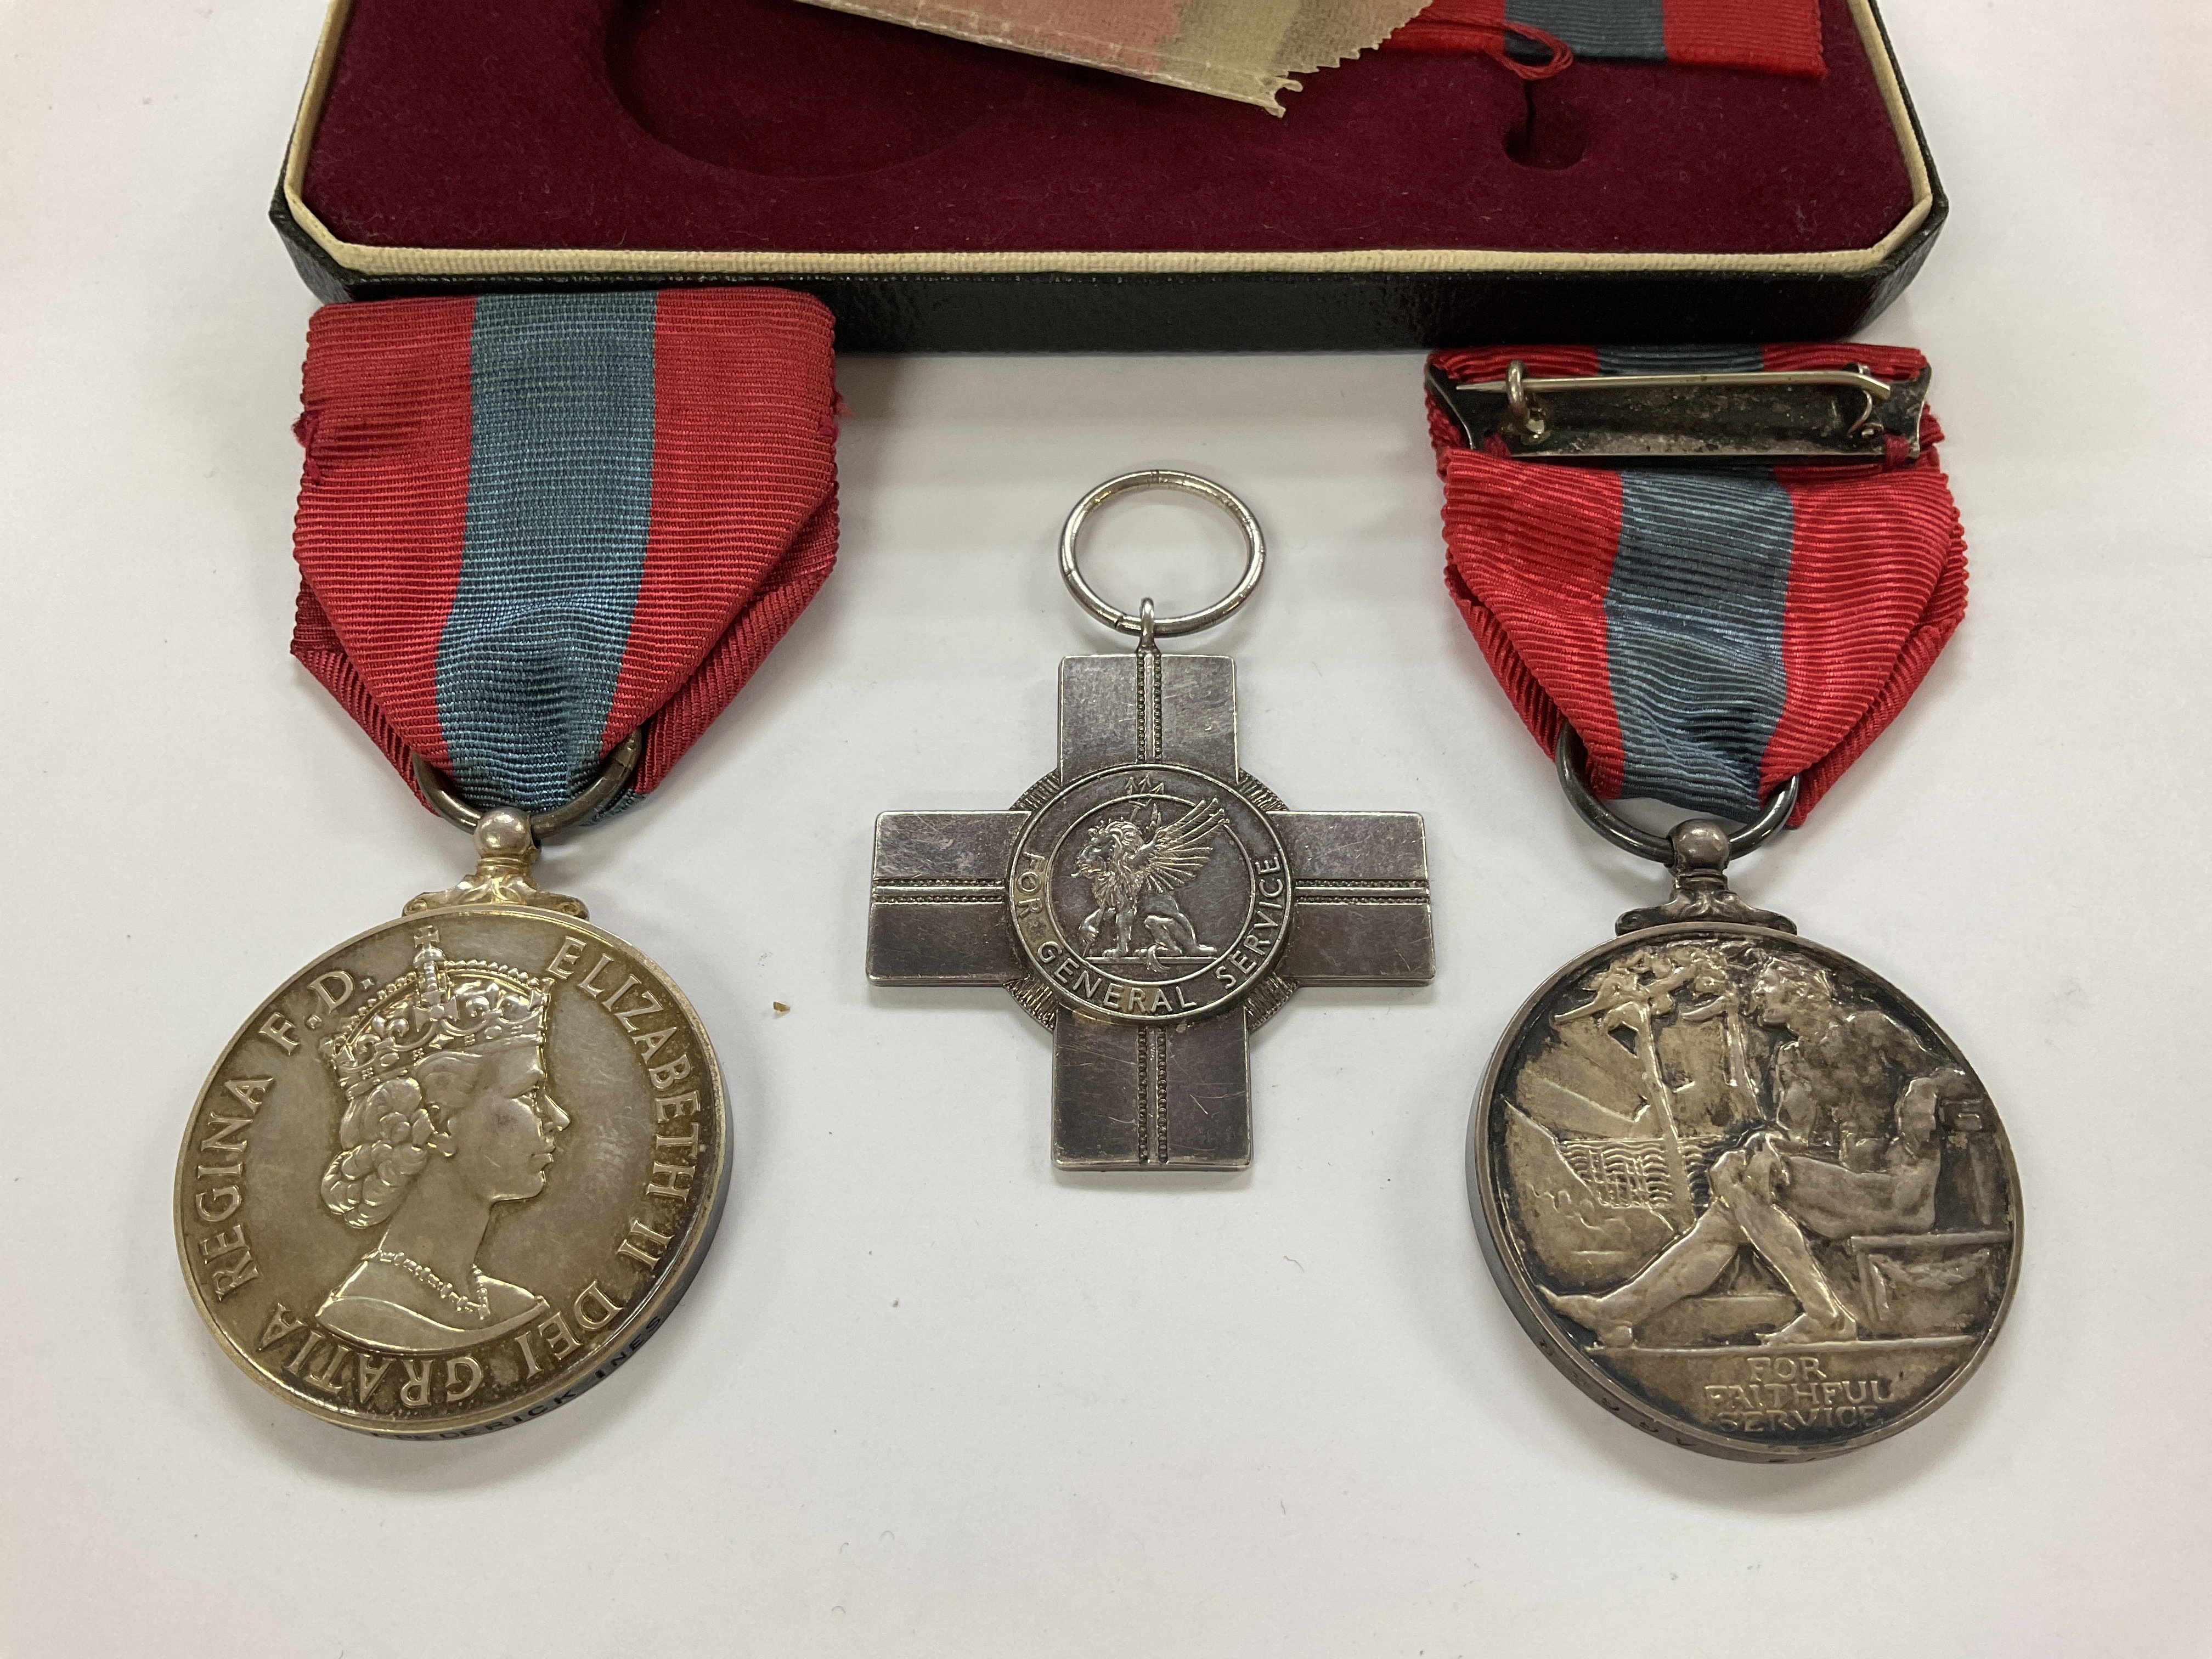 2 Imperial service medals, 1 for Francis Agger, th - Image 2 of 2